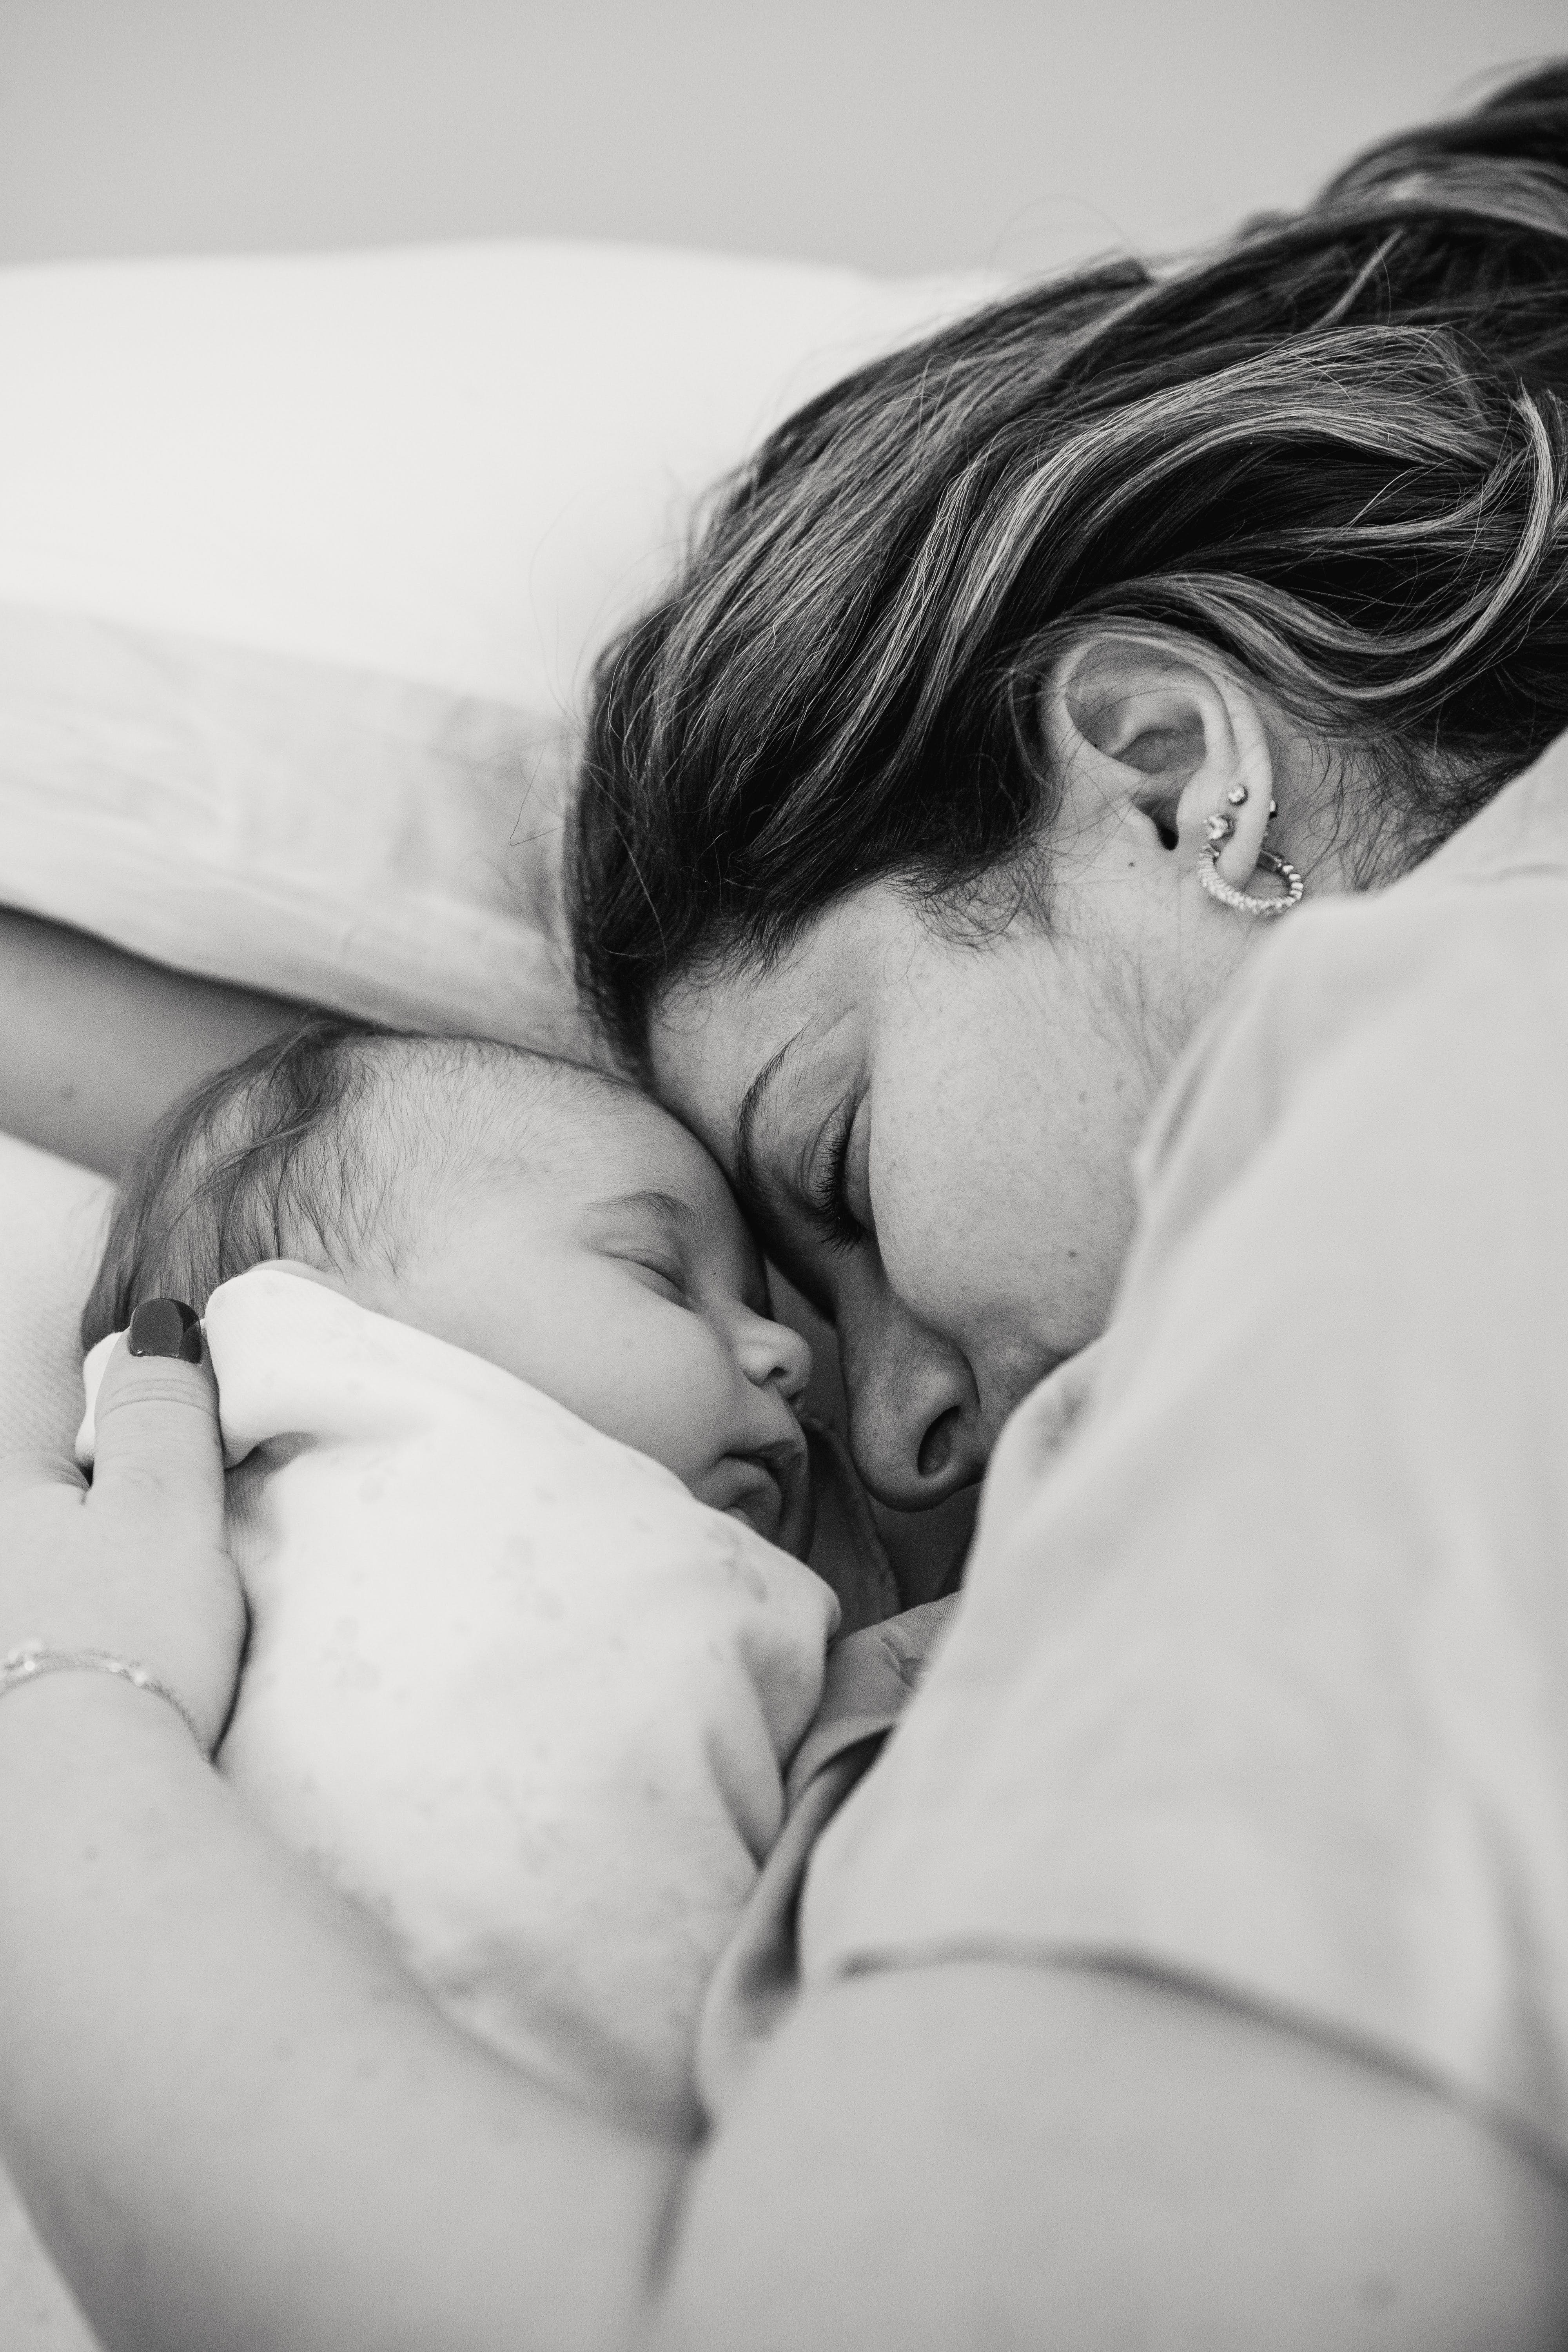 A mother lying down with her newborn baby | Source: Pexels